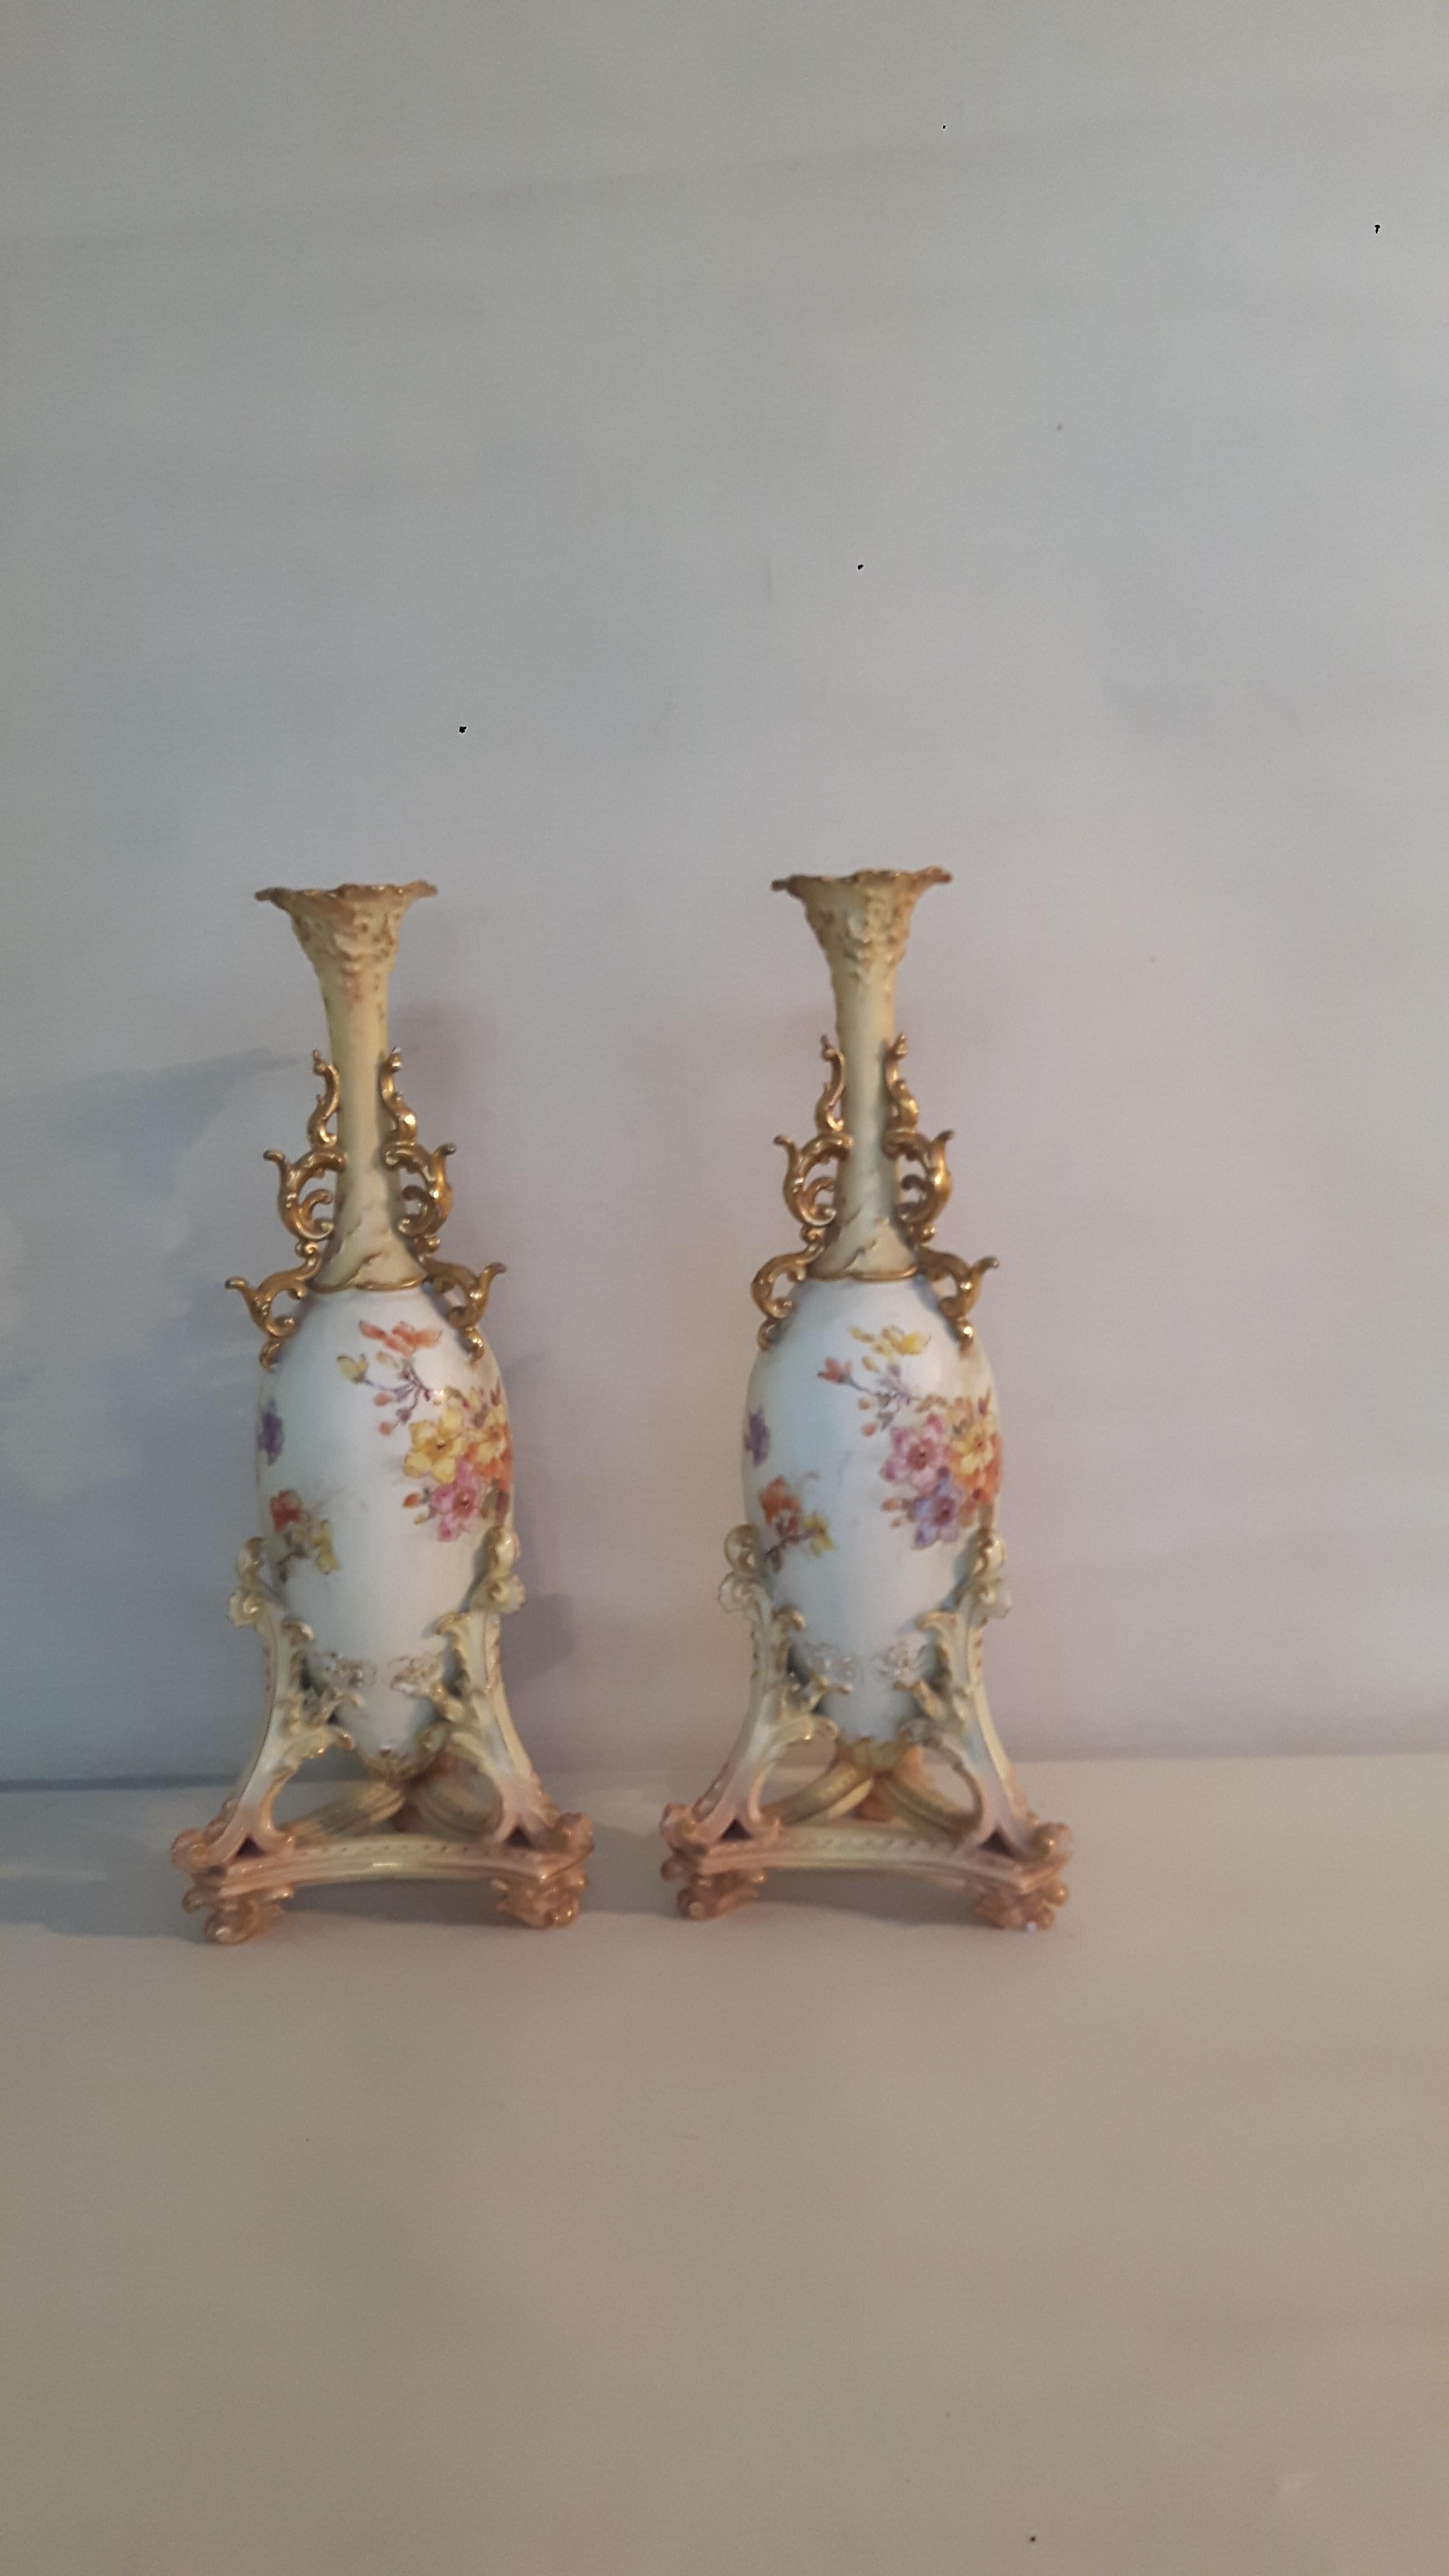 A pair of Rudolfstadt Porcelain vases, very much in the Royal Worcester style, hand painted with floral subjects on a duck-egg background; the neck and foot of the vases decorated with bisque and gilt scrolls the necks enhanced by a gilt Florentine